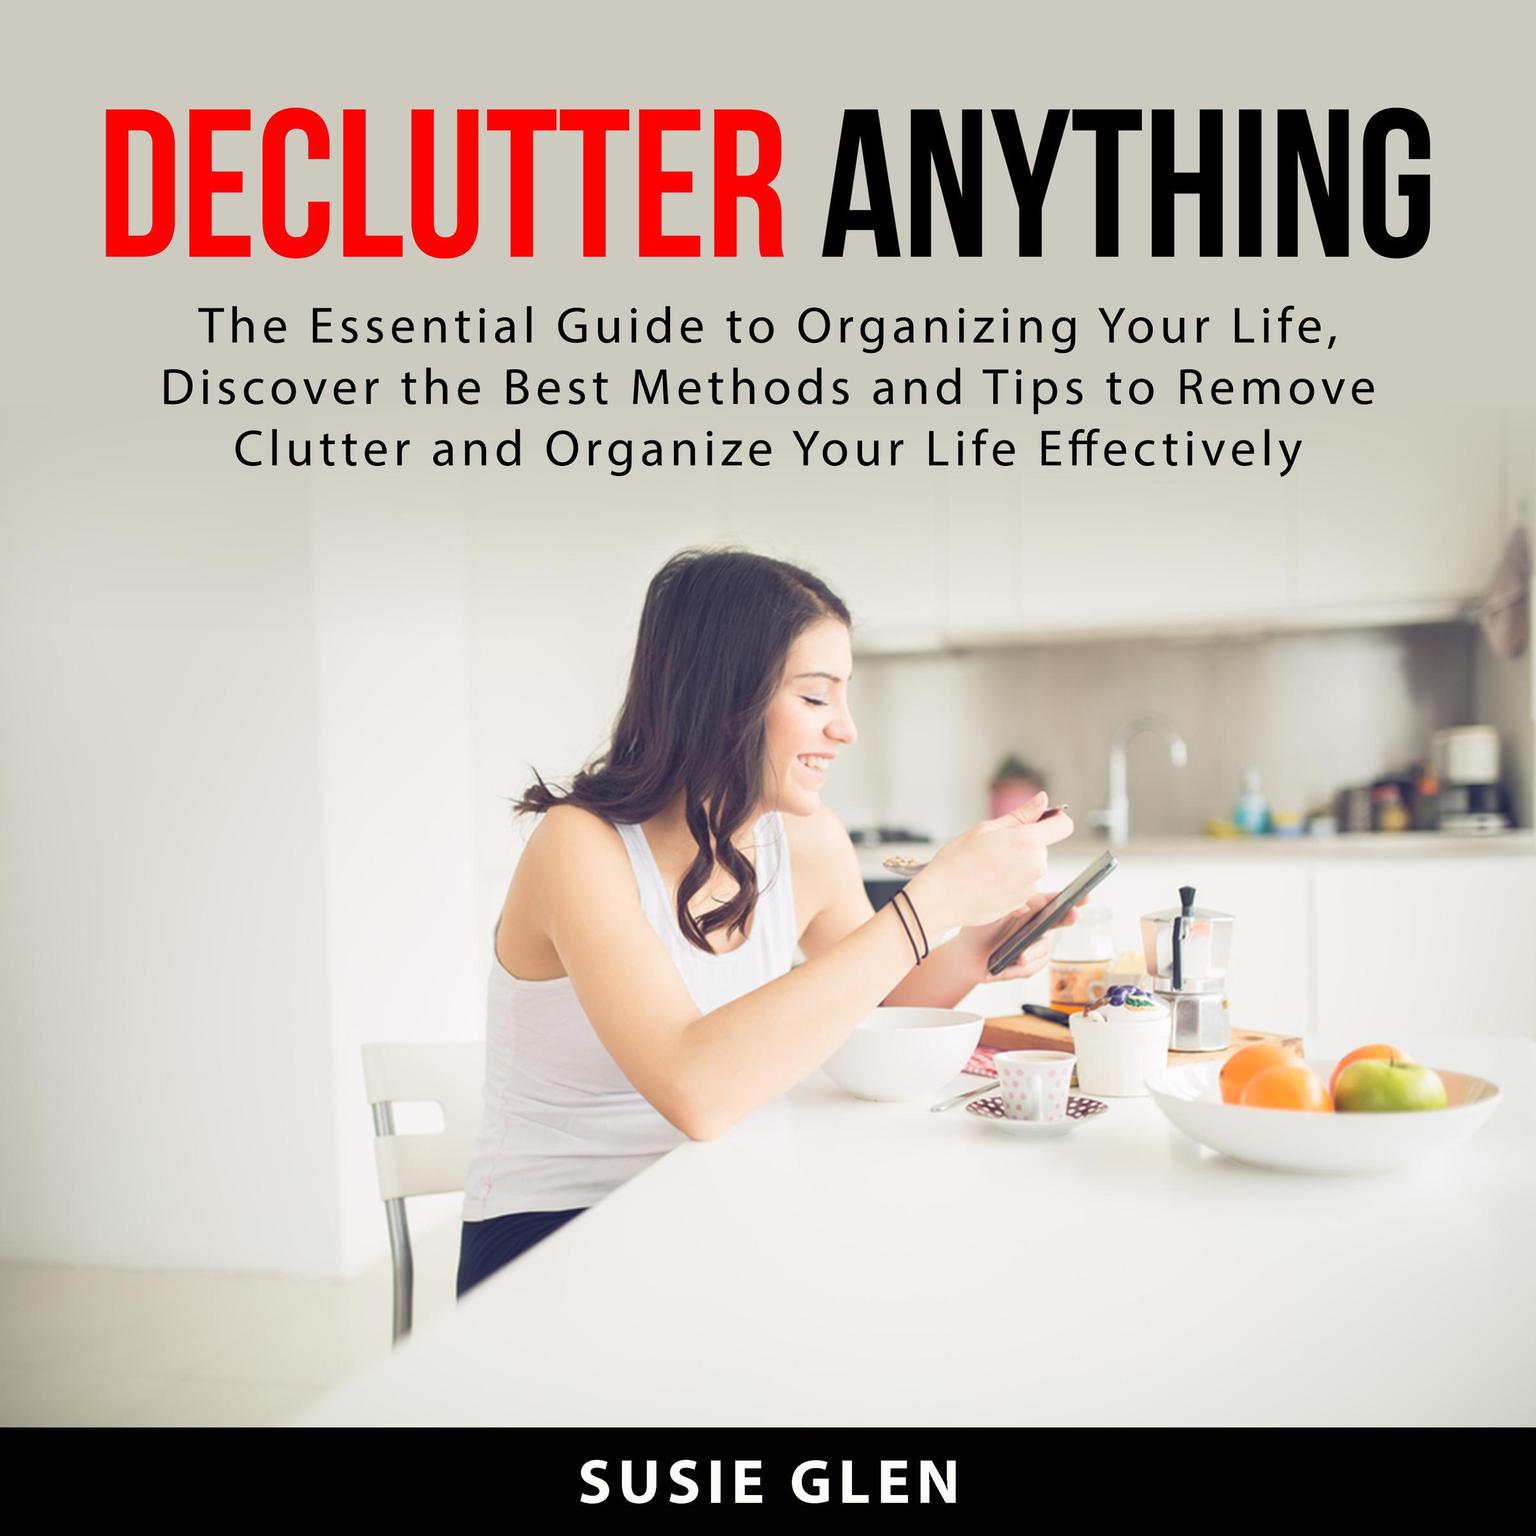 Declutter Anything: The Essential Guide to Organizing Your Life, Discover the Best Methods and Tips to Remove Clutter and Organize Your Life Effectively Audiobook, by Susie Glen